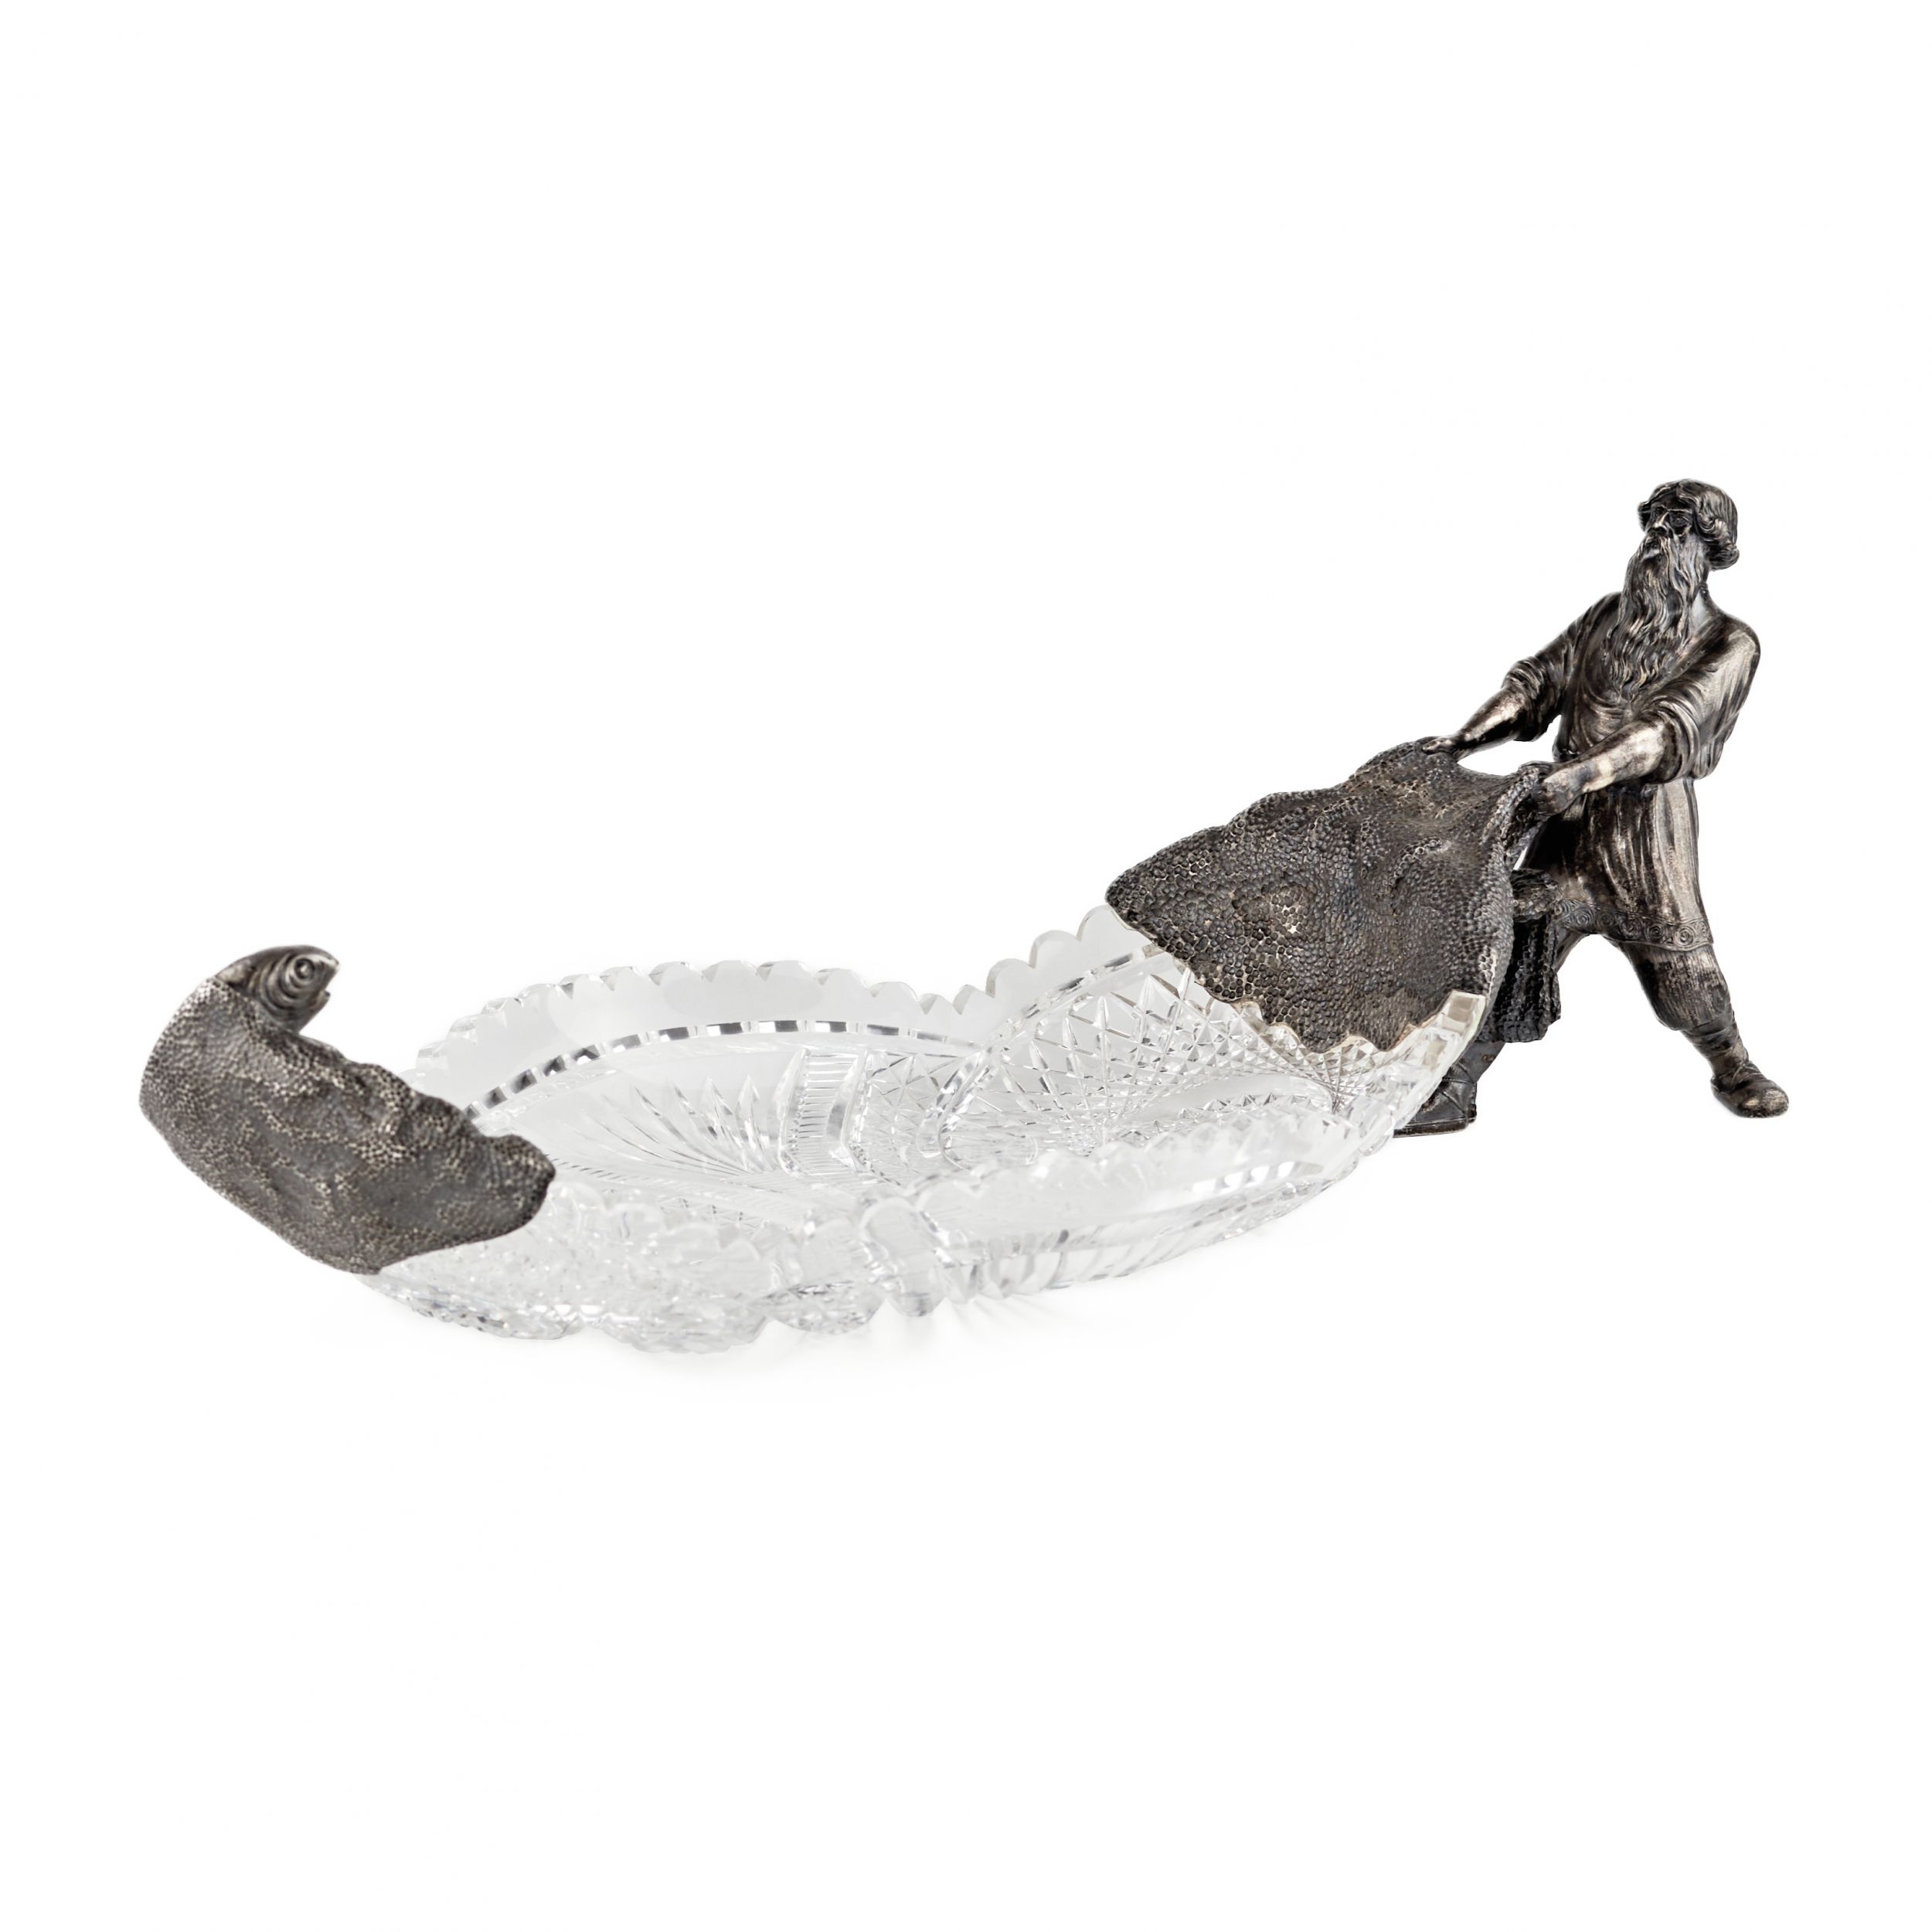 Crystal-dish-in-silver-14-artels-of-jewelers-The-Tale-of-the-Fisherman-and-the-Fish-Moscow-1908-1917-